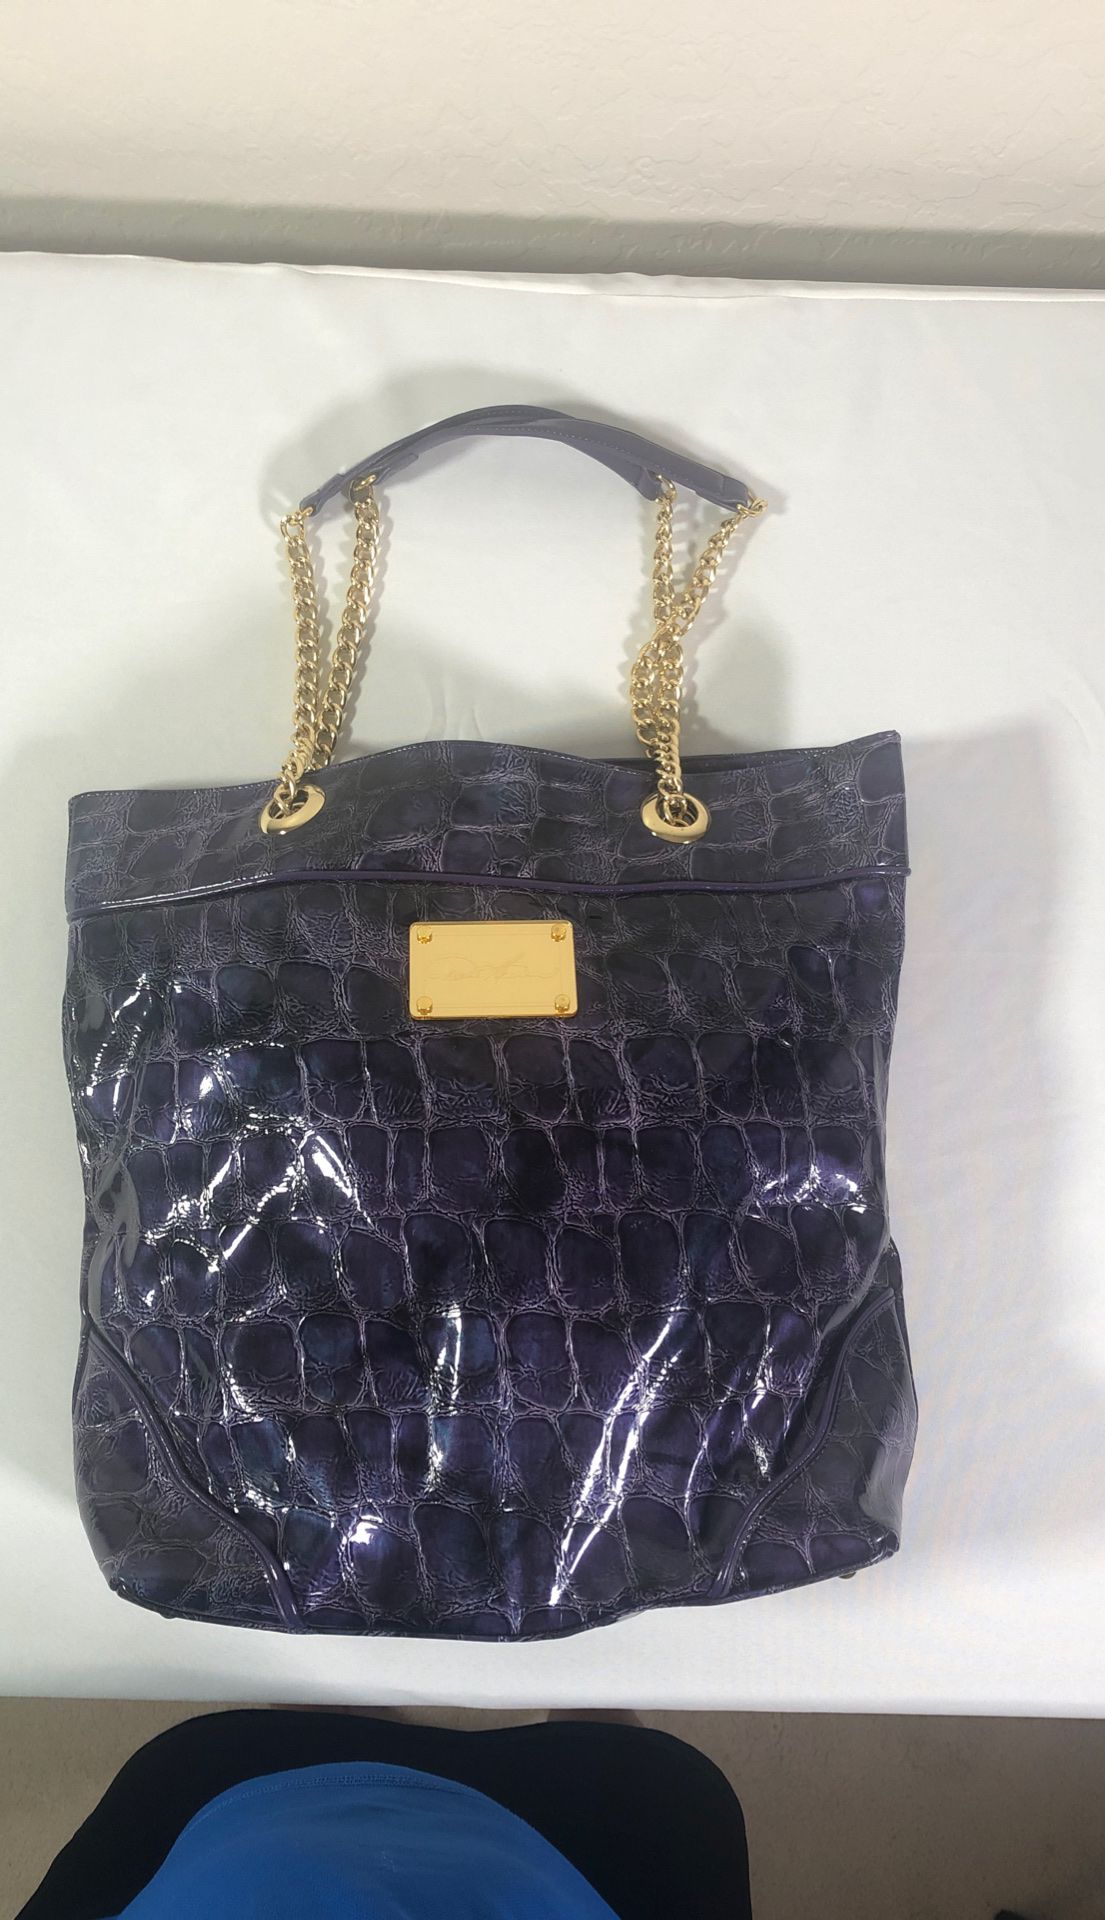 Purple with Gold chain handle Bag